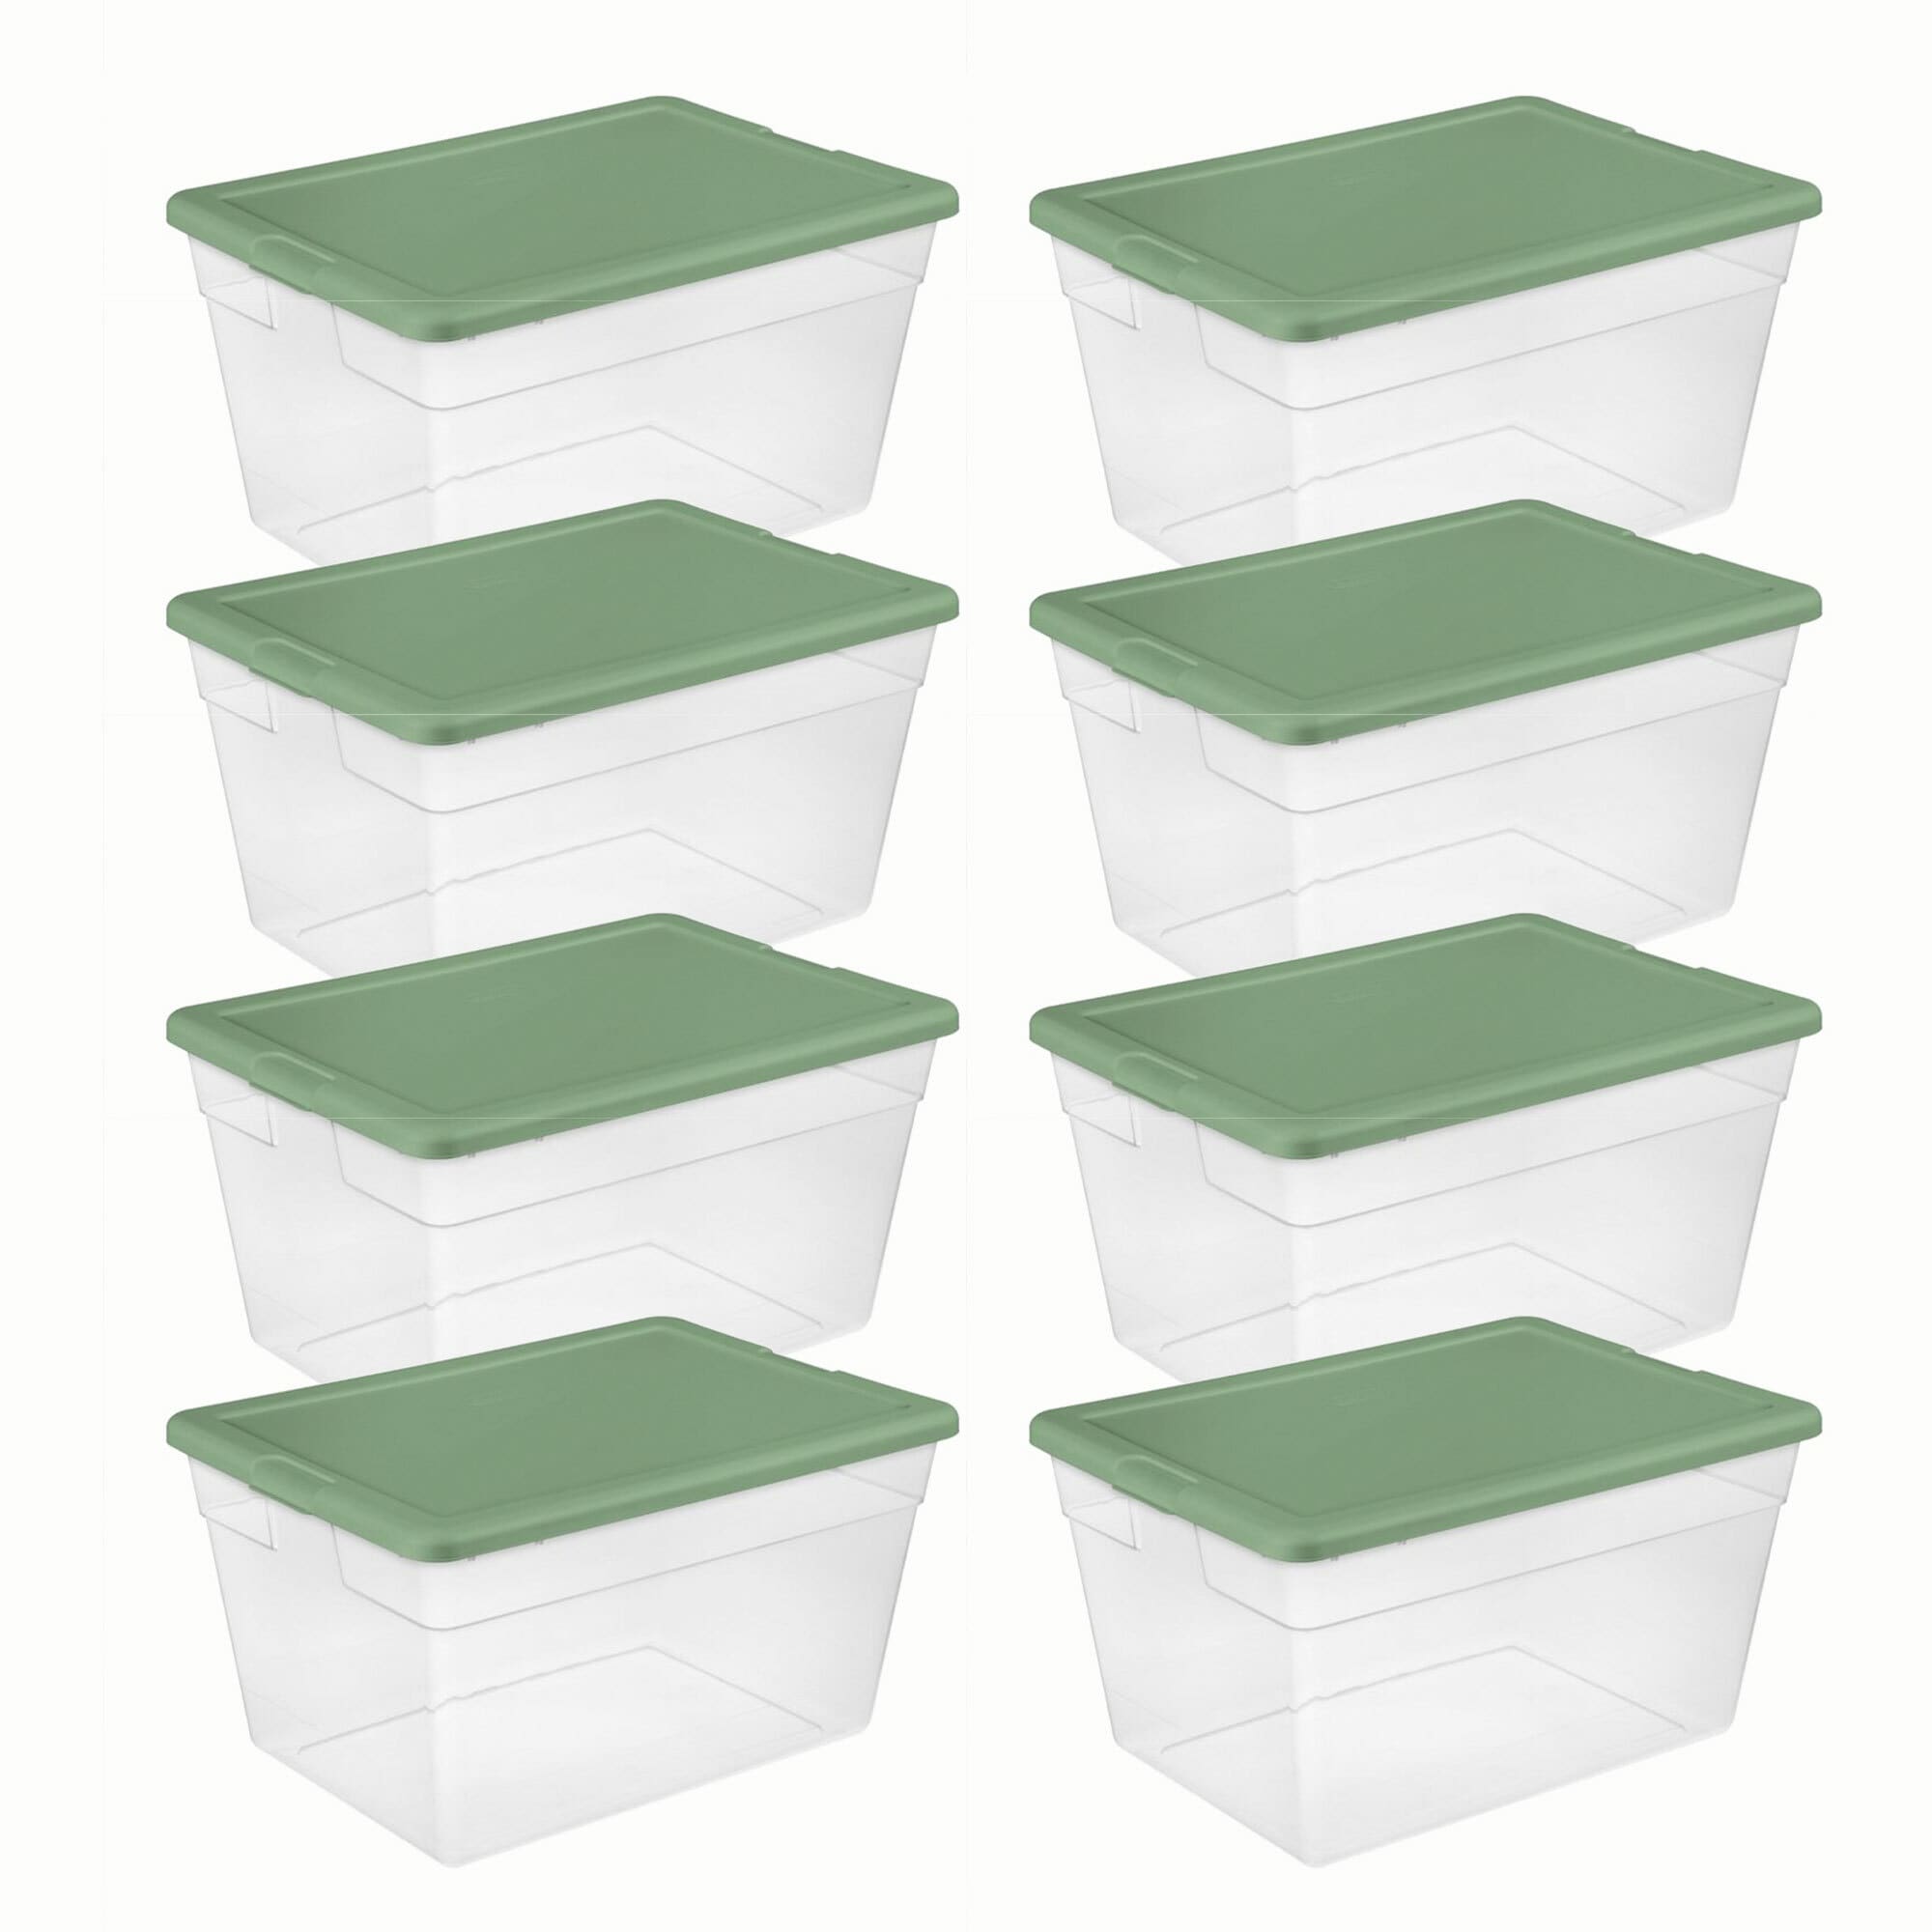 Top Quality Small Plastic Boxes Wholesale At Affordable Prices 